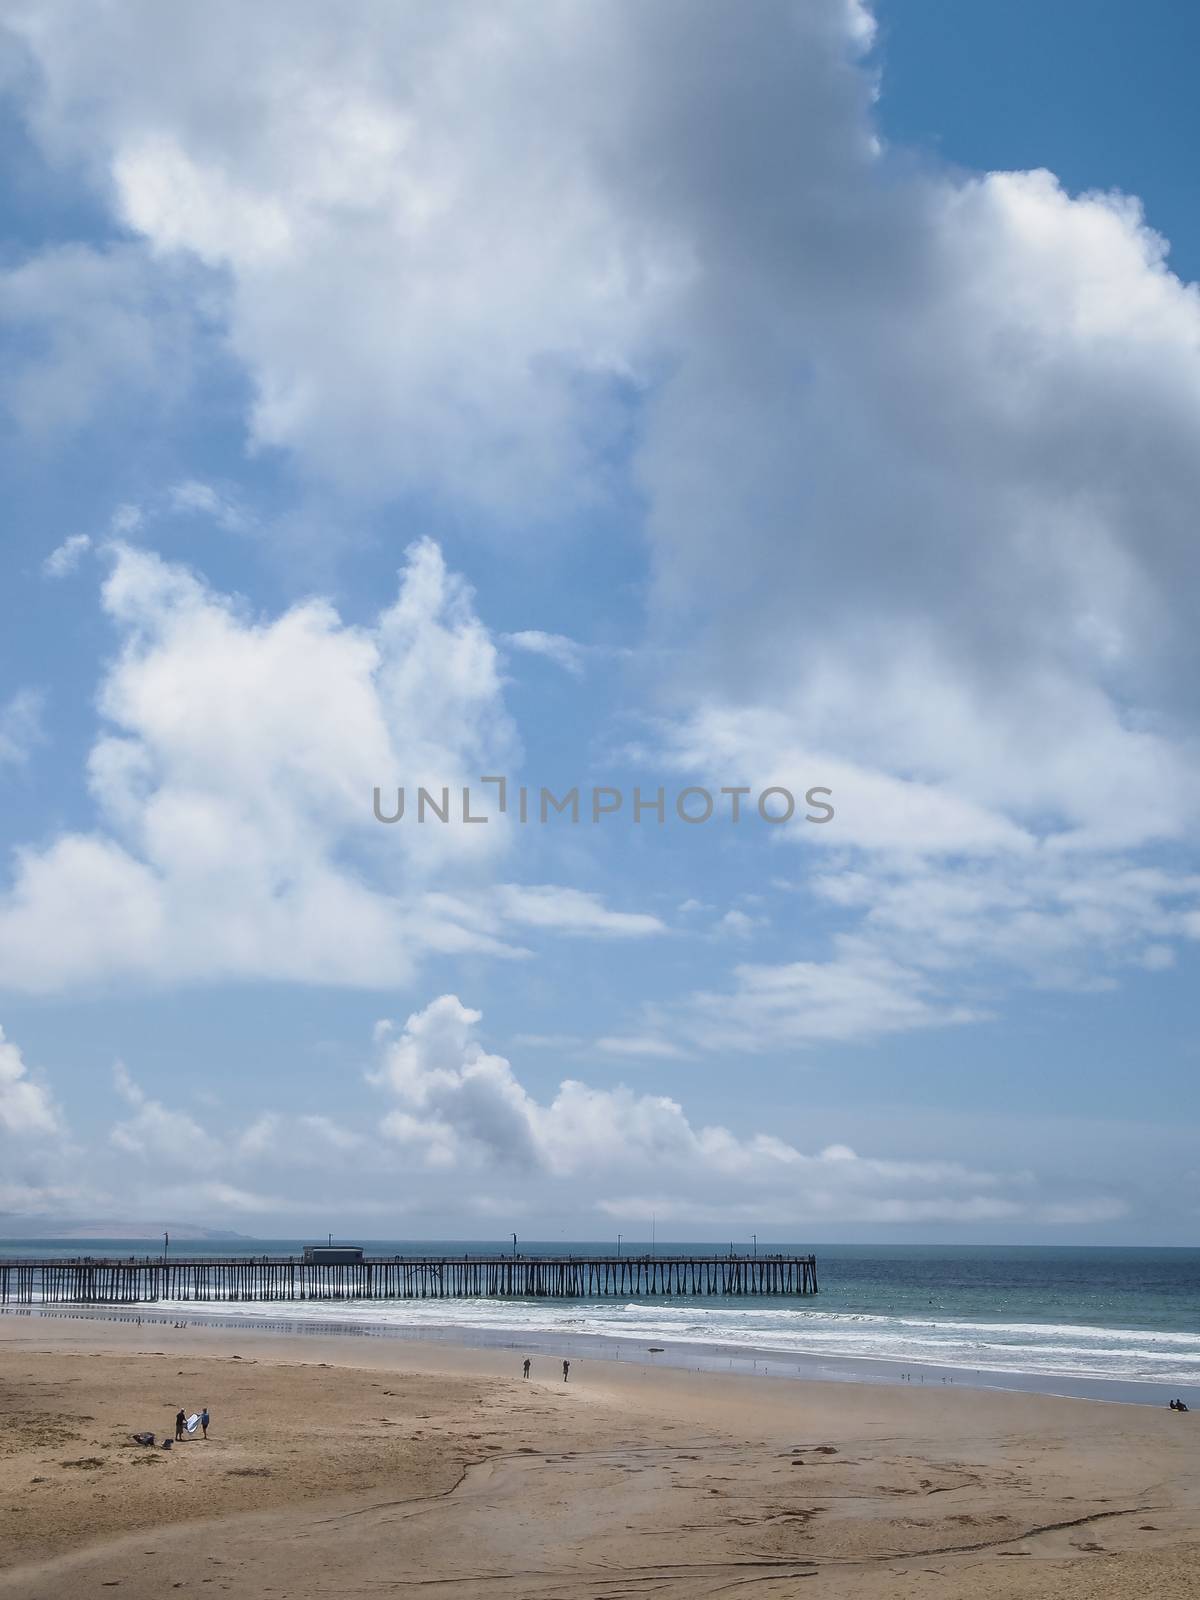 Image of wooden jetty with ocean and sky in background